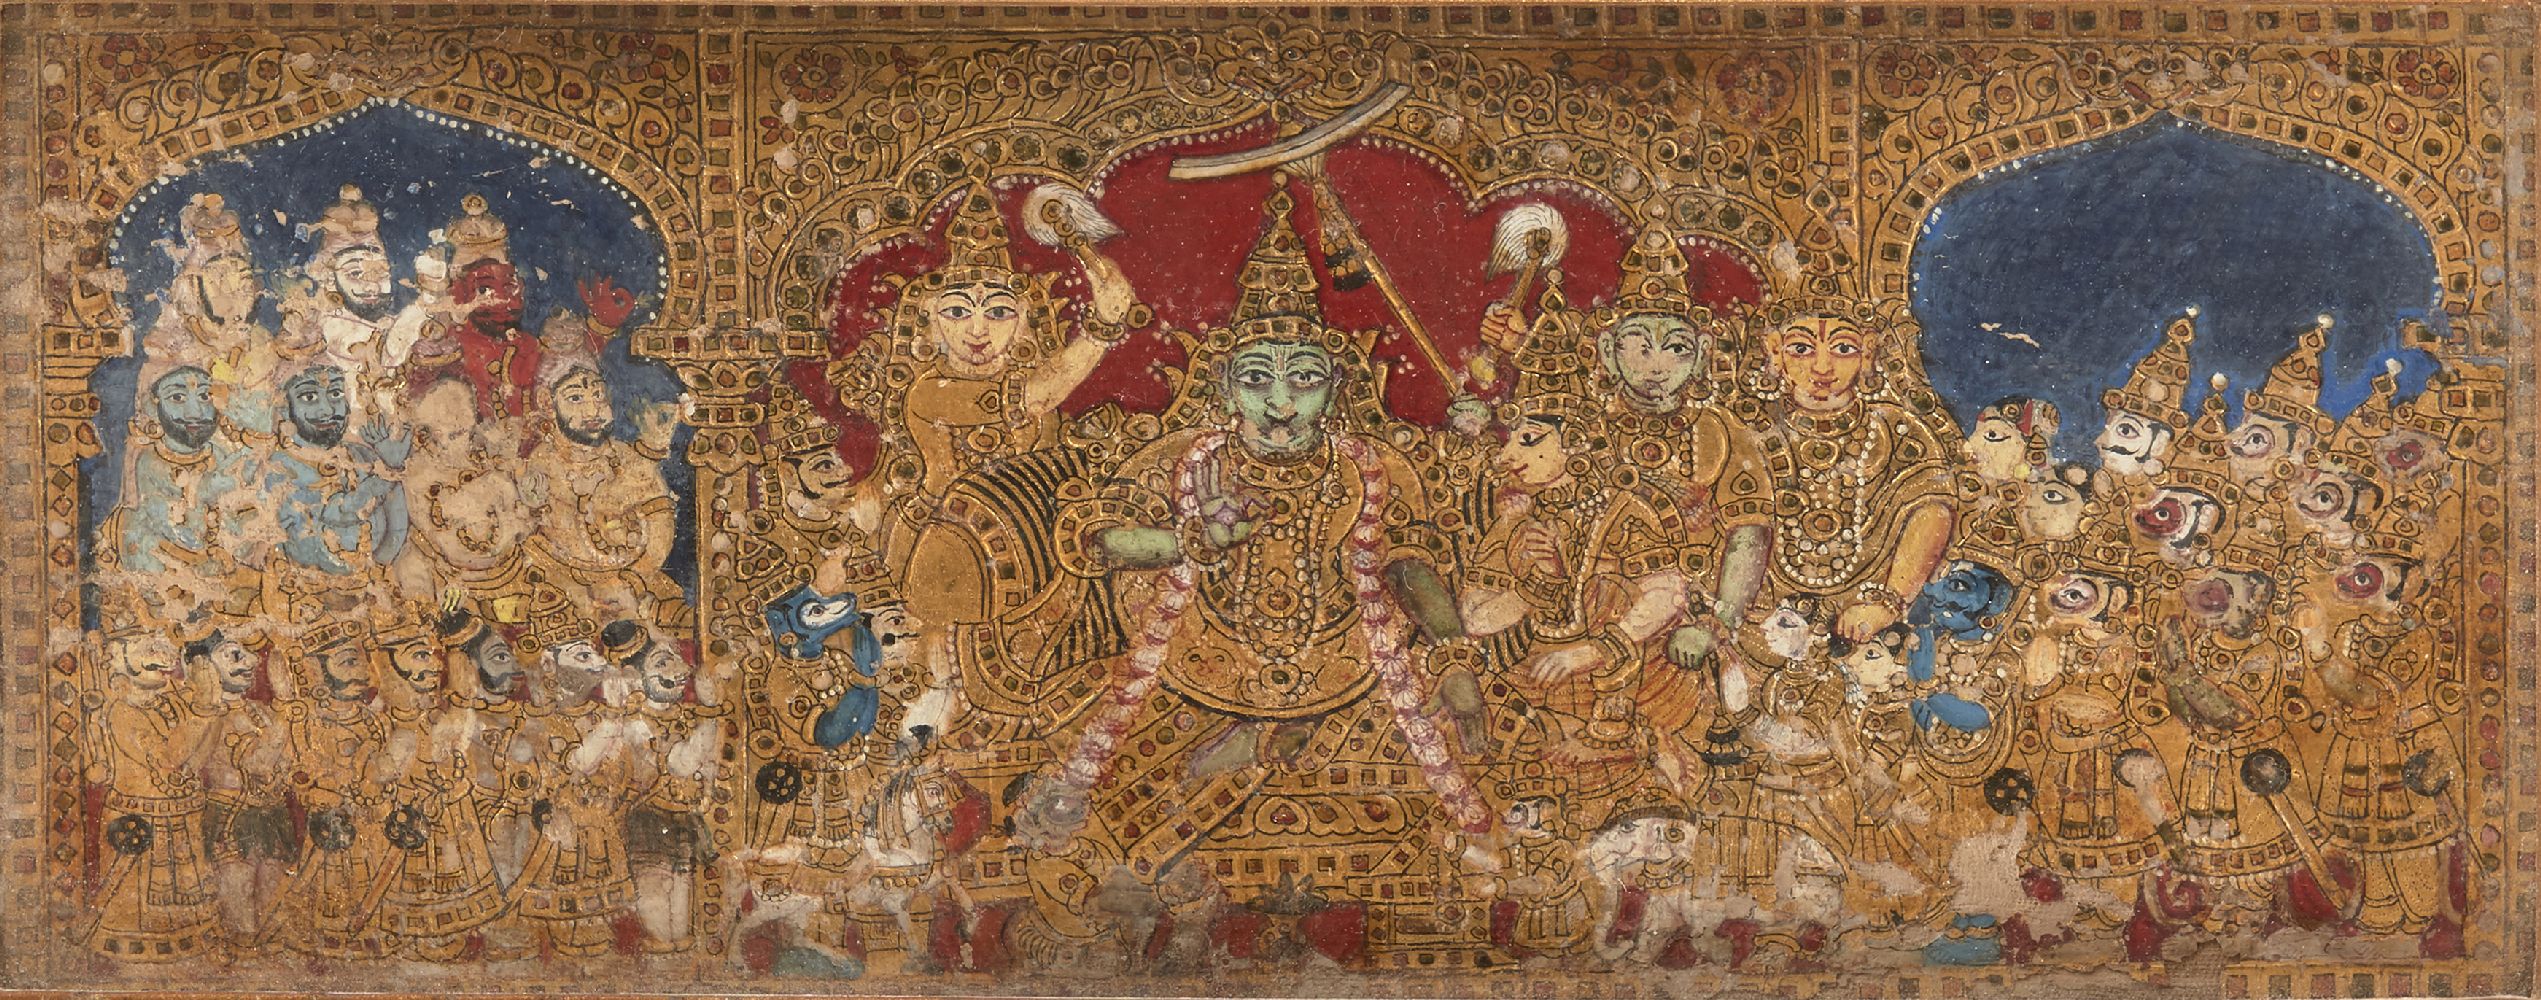 A small devotional image of Hanuman and worshippers, Tanjore, late 18th-early 19th century, opaque